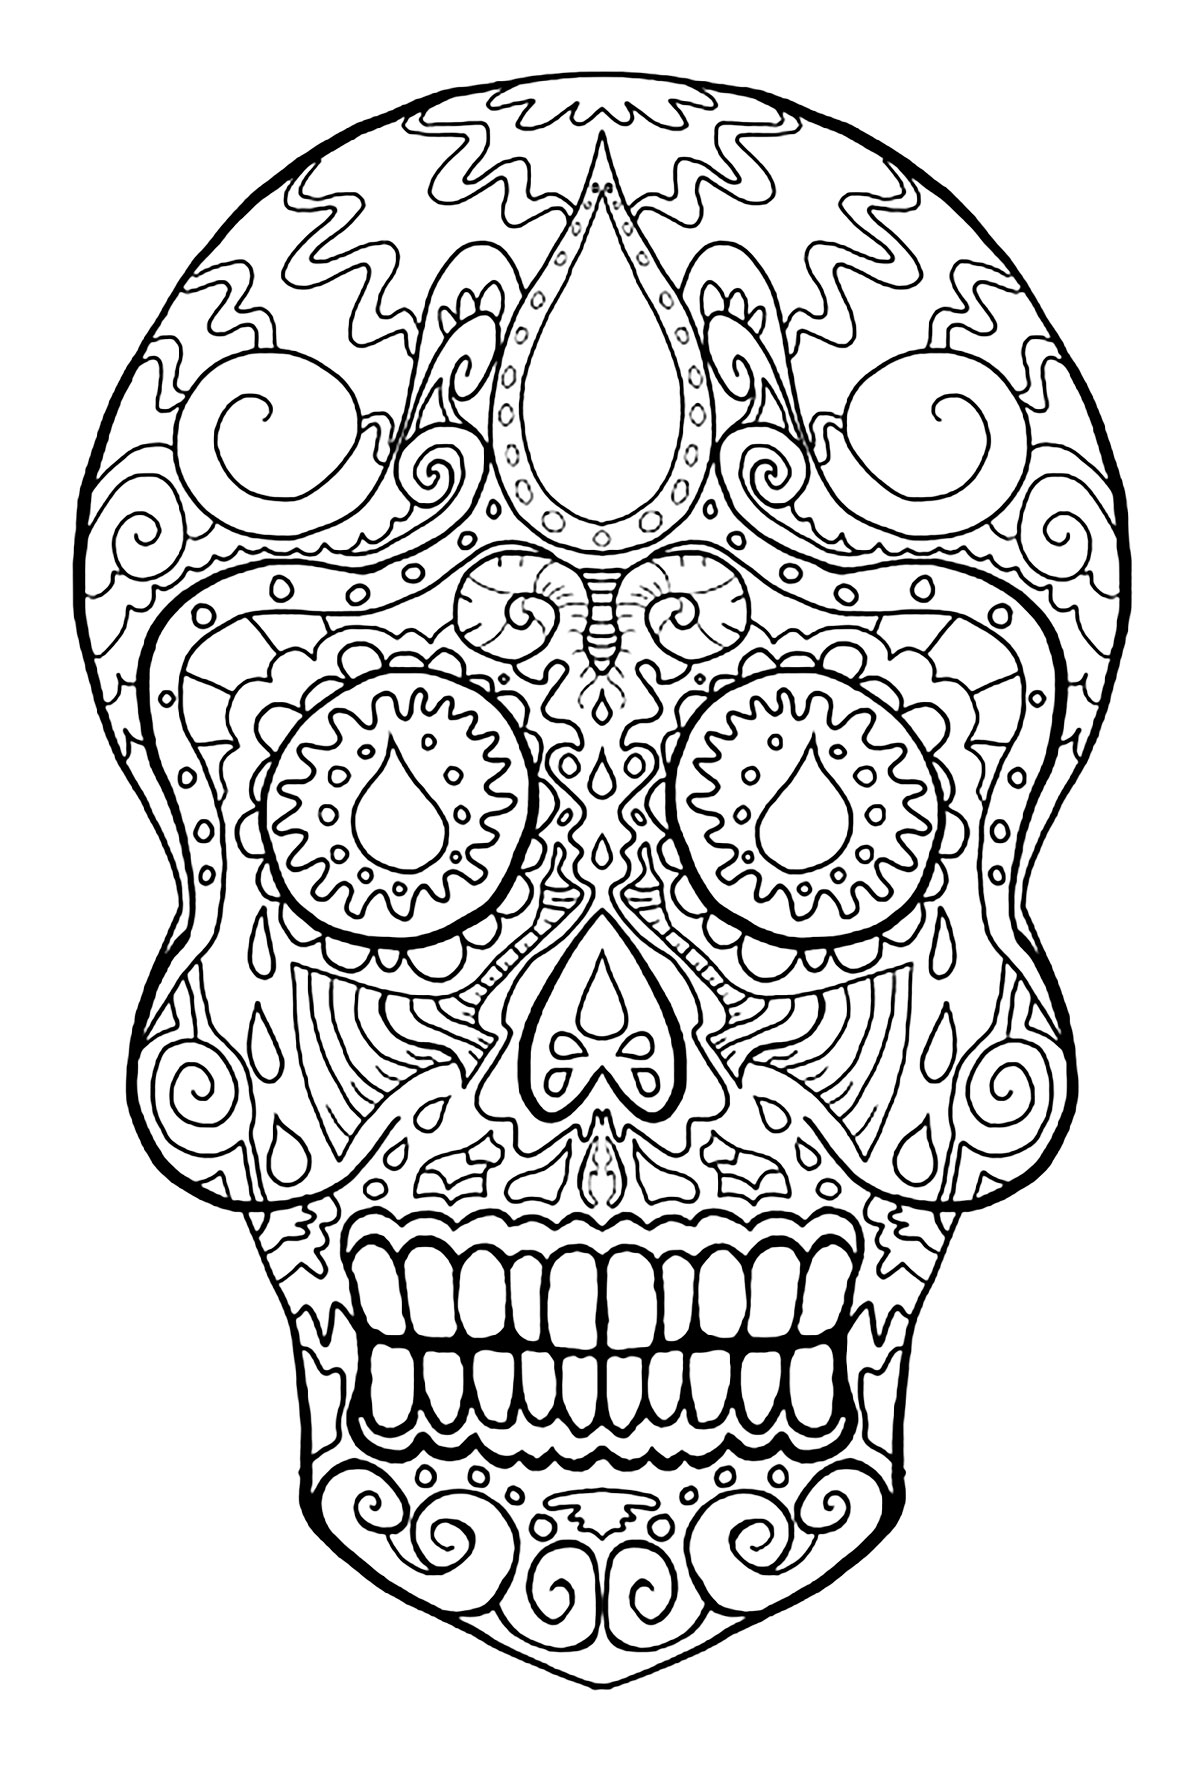 Skull representative of the Mexican holiday 'Dia de los Muertos'. This coloring page is inspired by the Mexican festival Dias de los Muertos. It represents a skull, essential symbol of this celebration.It is composed of motifs reflecting the joy and gaiety of this holiday, Artist : Art. Isabelle